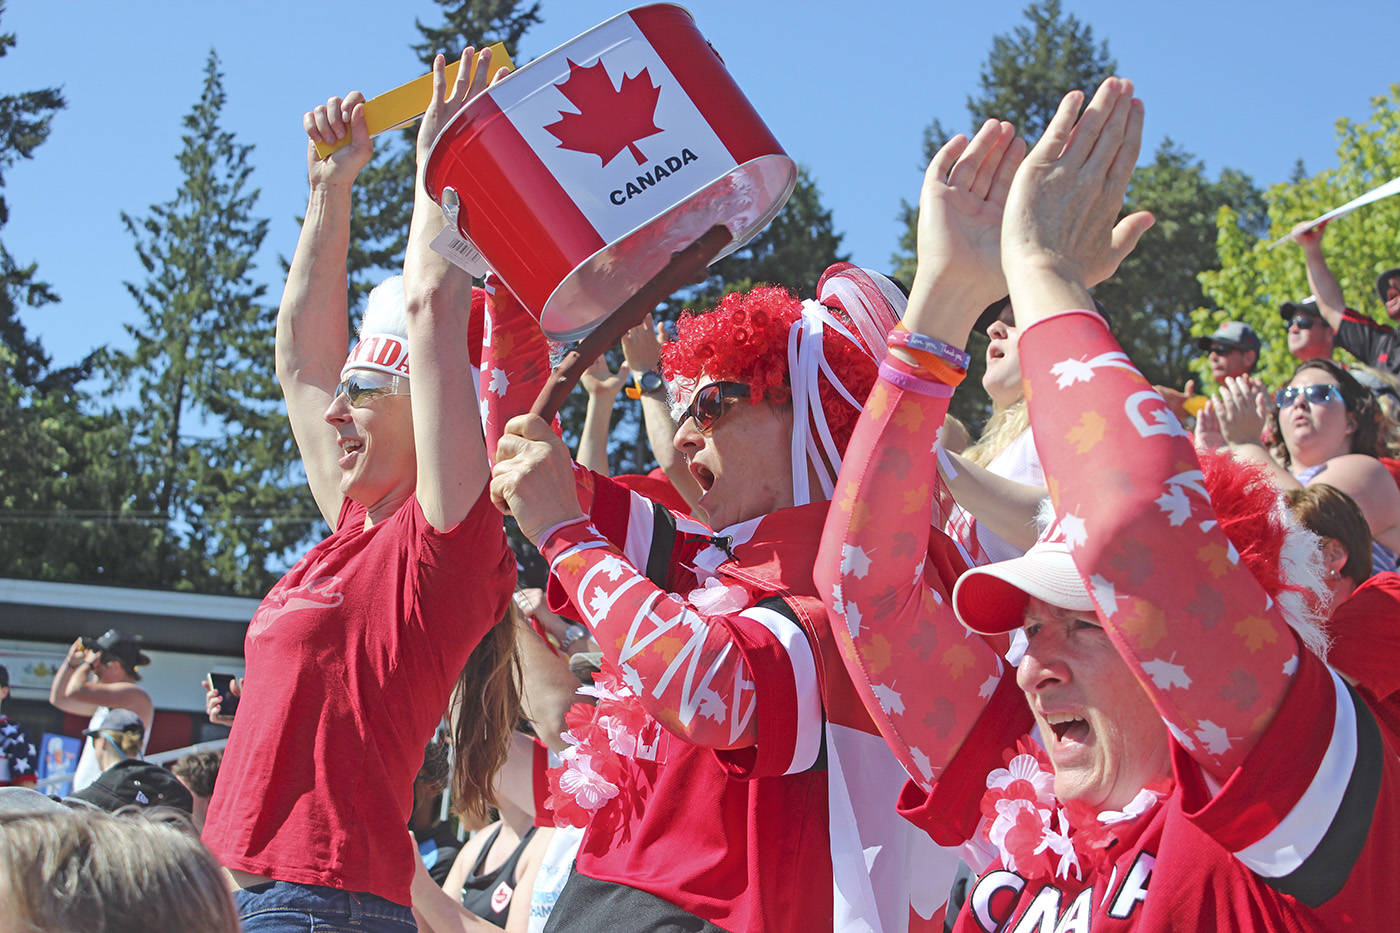 Fans cheer on Canada’s women’s sevens team in the quarterfinal match against the USA at Westhills Stadium in Langford Sunday. Canada lost 28-26 to the USA. (Kendra Wong/News Gazette staff)